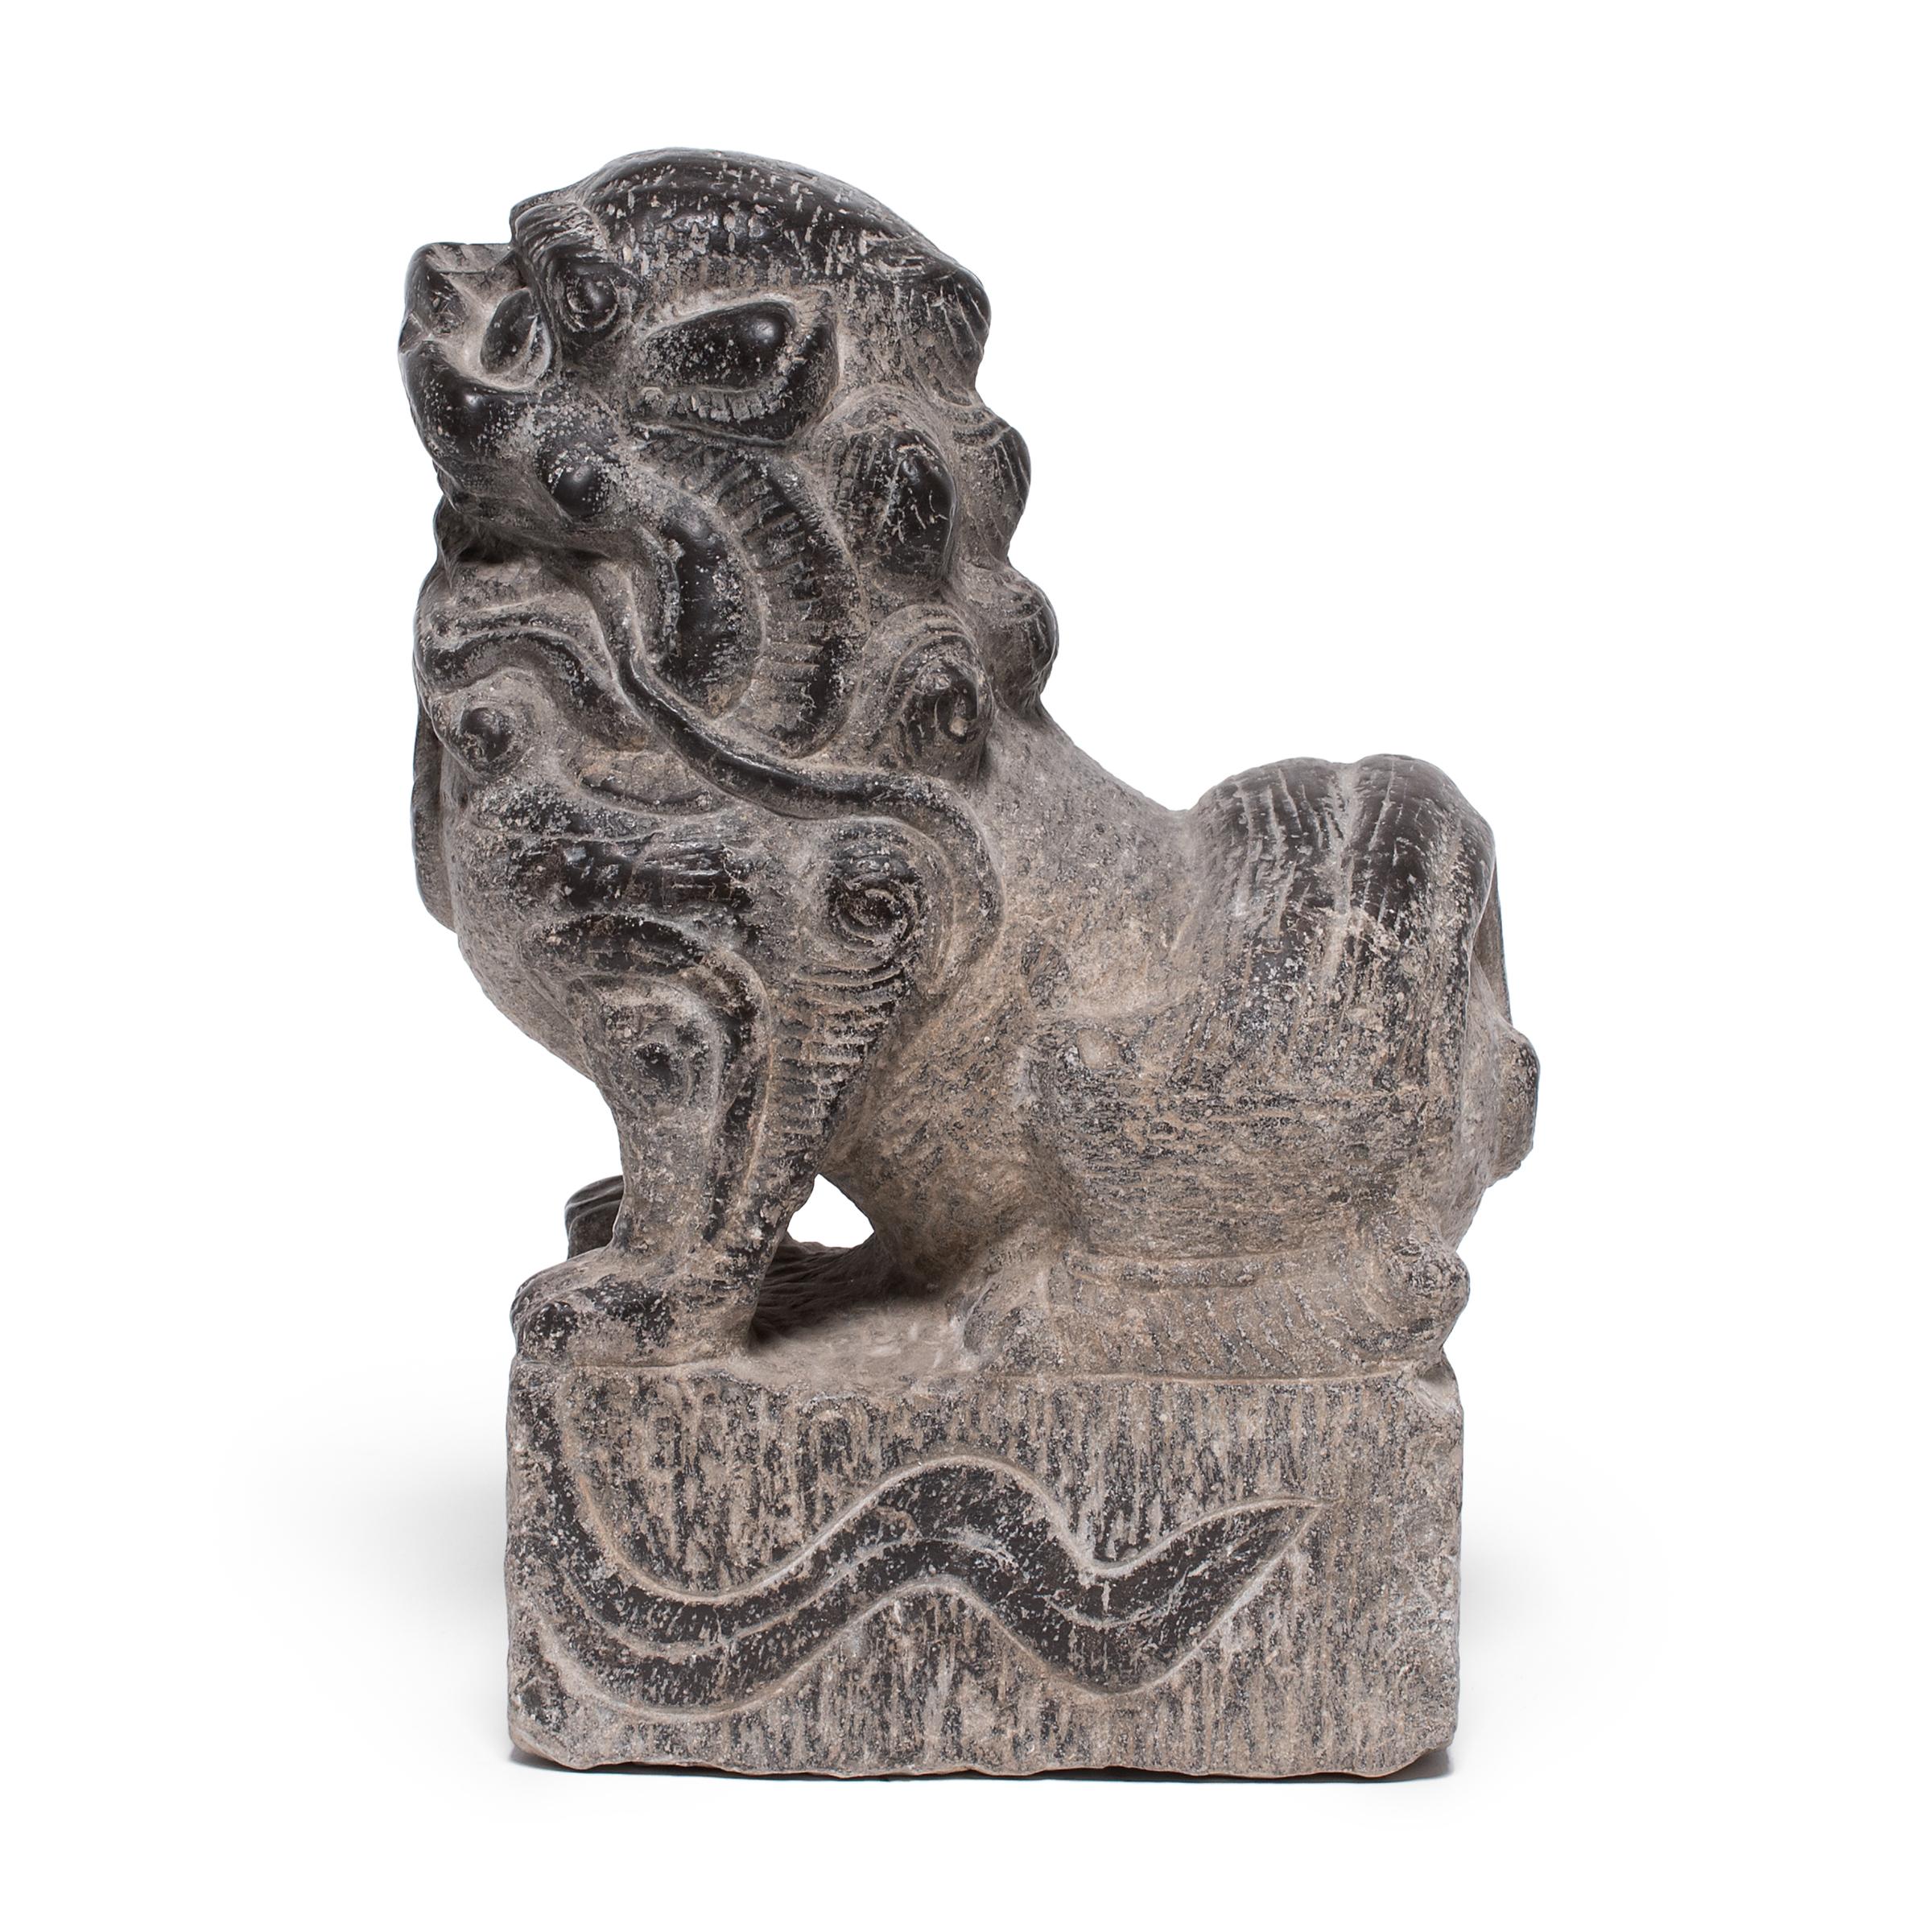 Hand-carved from a single block of limestone, this stone fu dog sits at attention as a watchful guardian of the home. He exudes a remarkable sense of life and energy - crouched on all fours with curly hair and a lively expression. A bell hanging